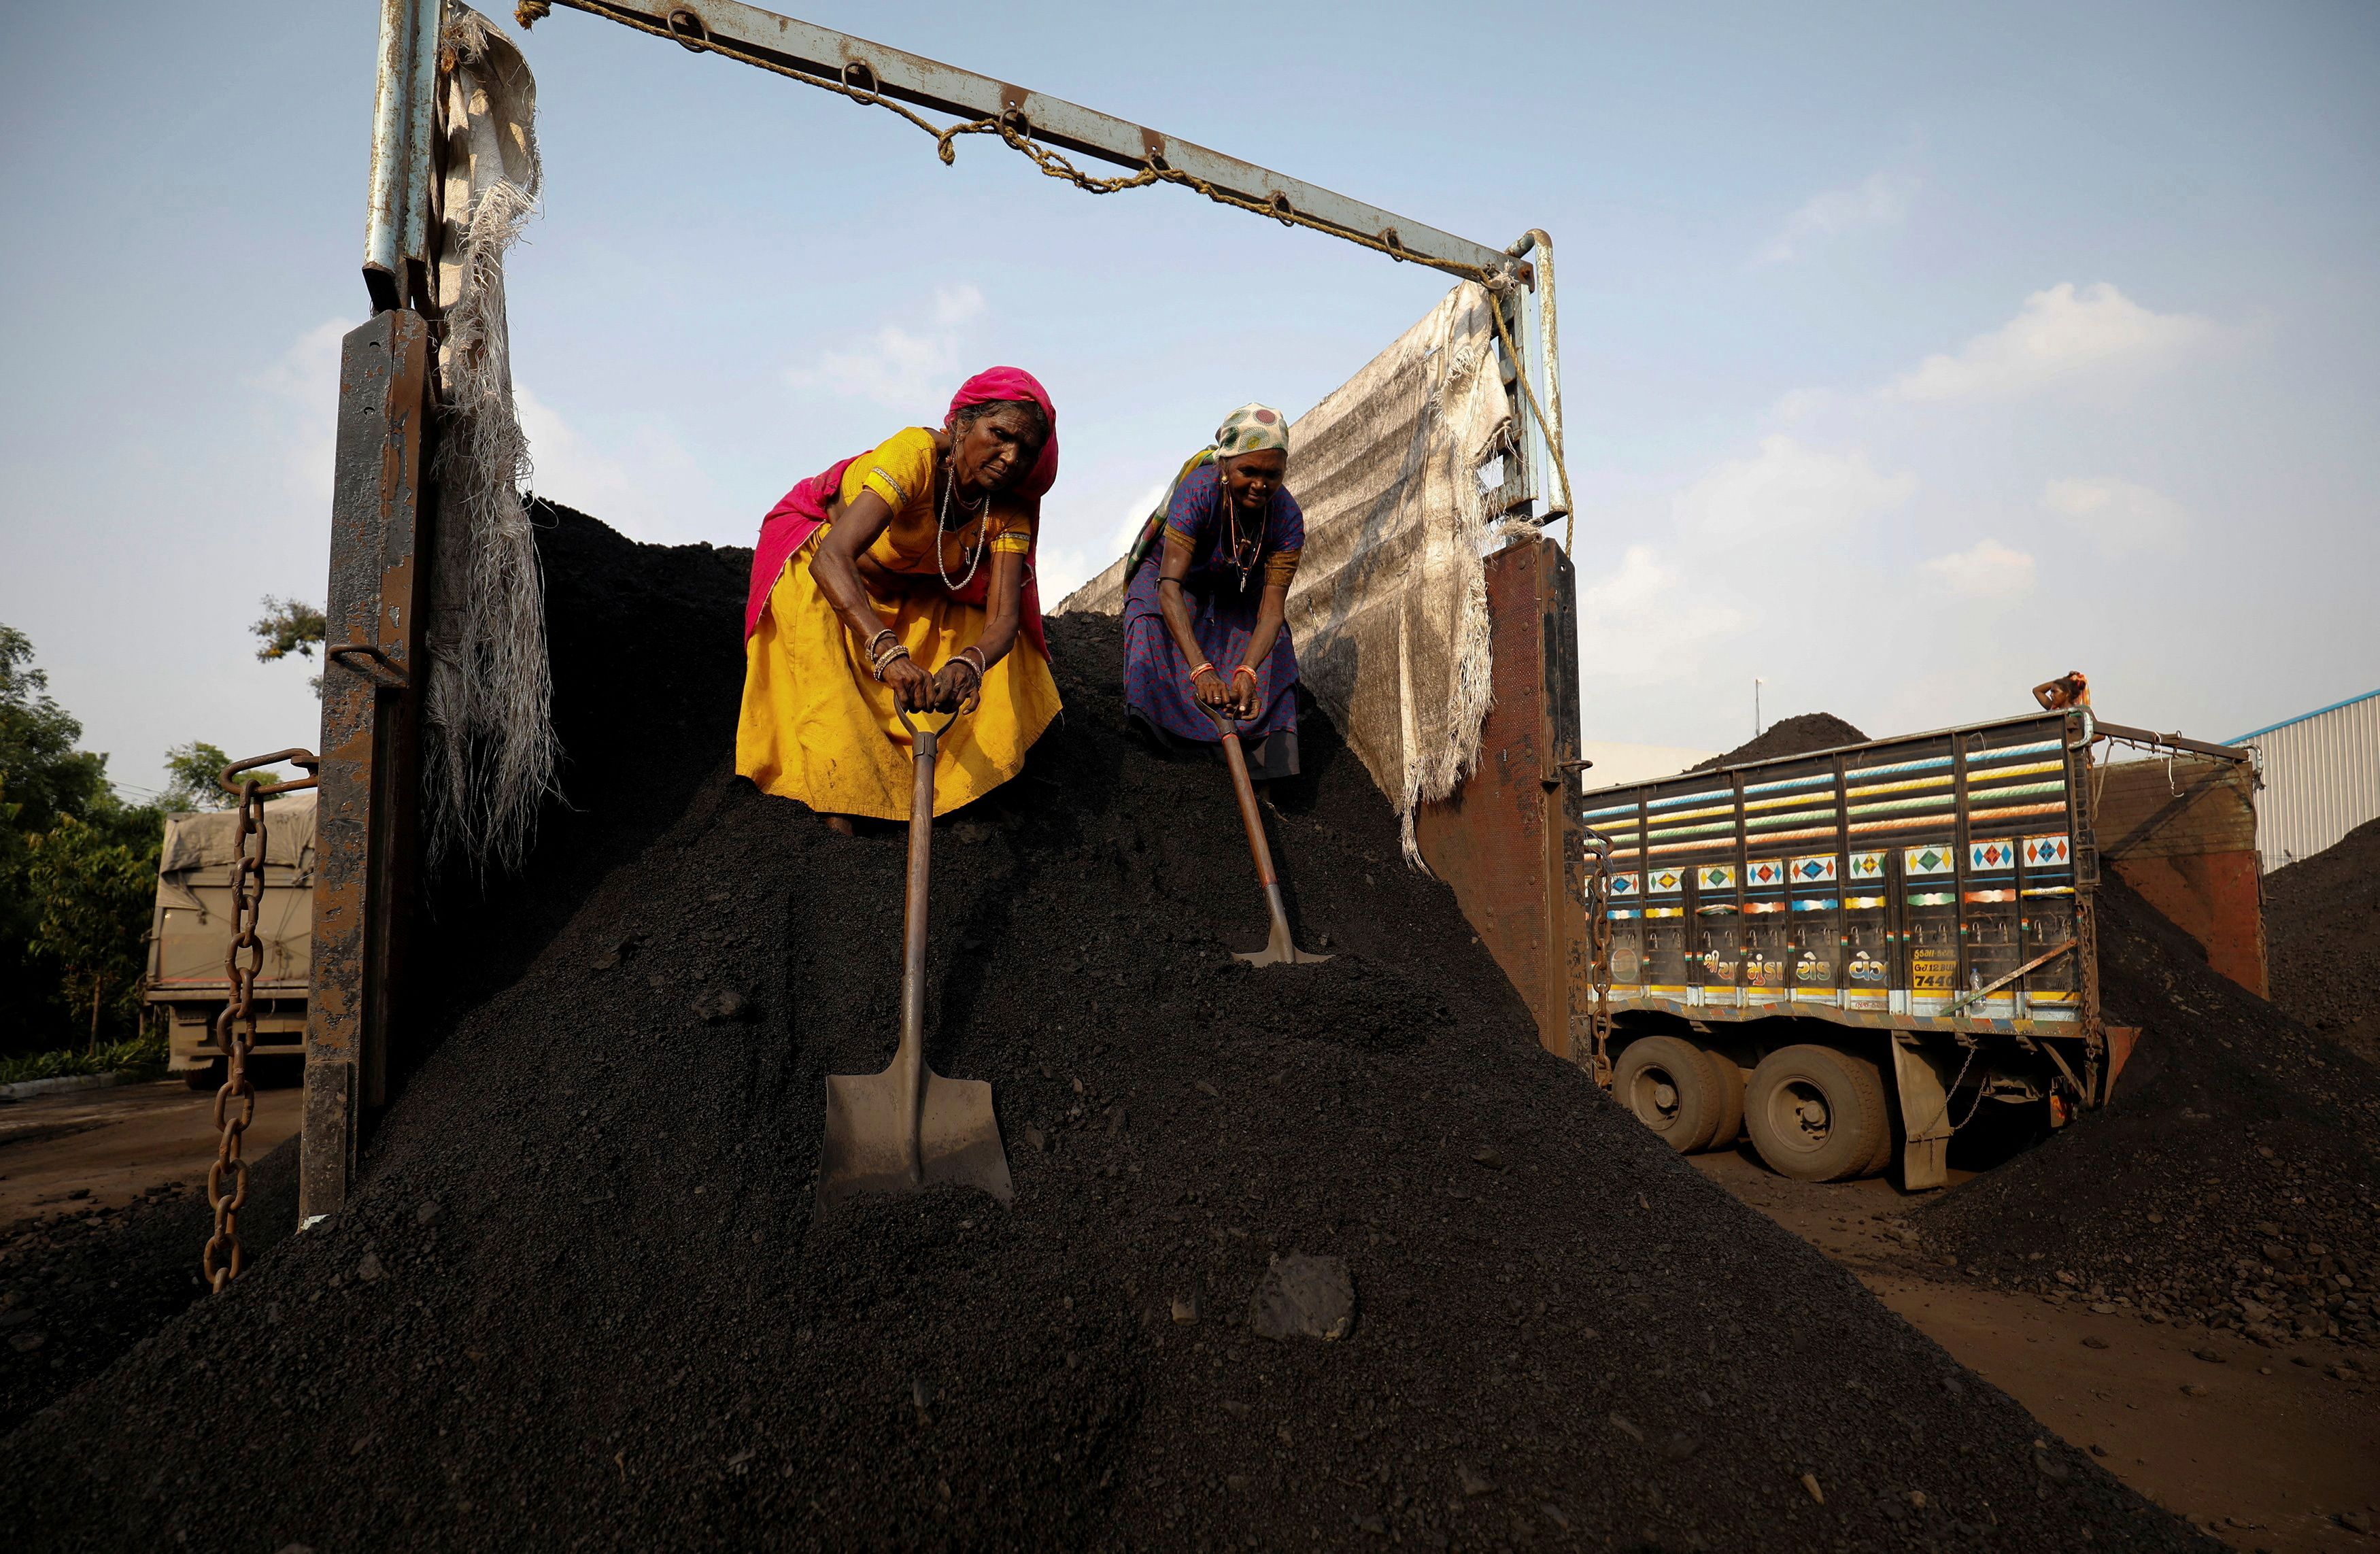 Workers unload coal from a supply truck at a yard on the outskirts of Ahmedabad